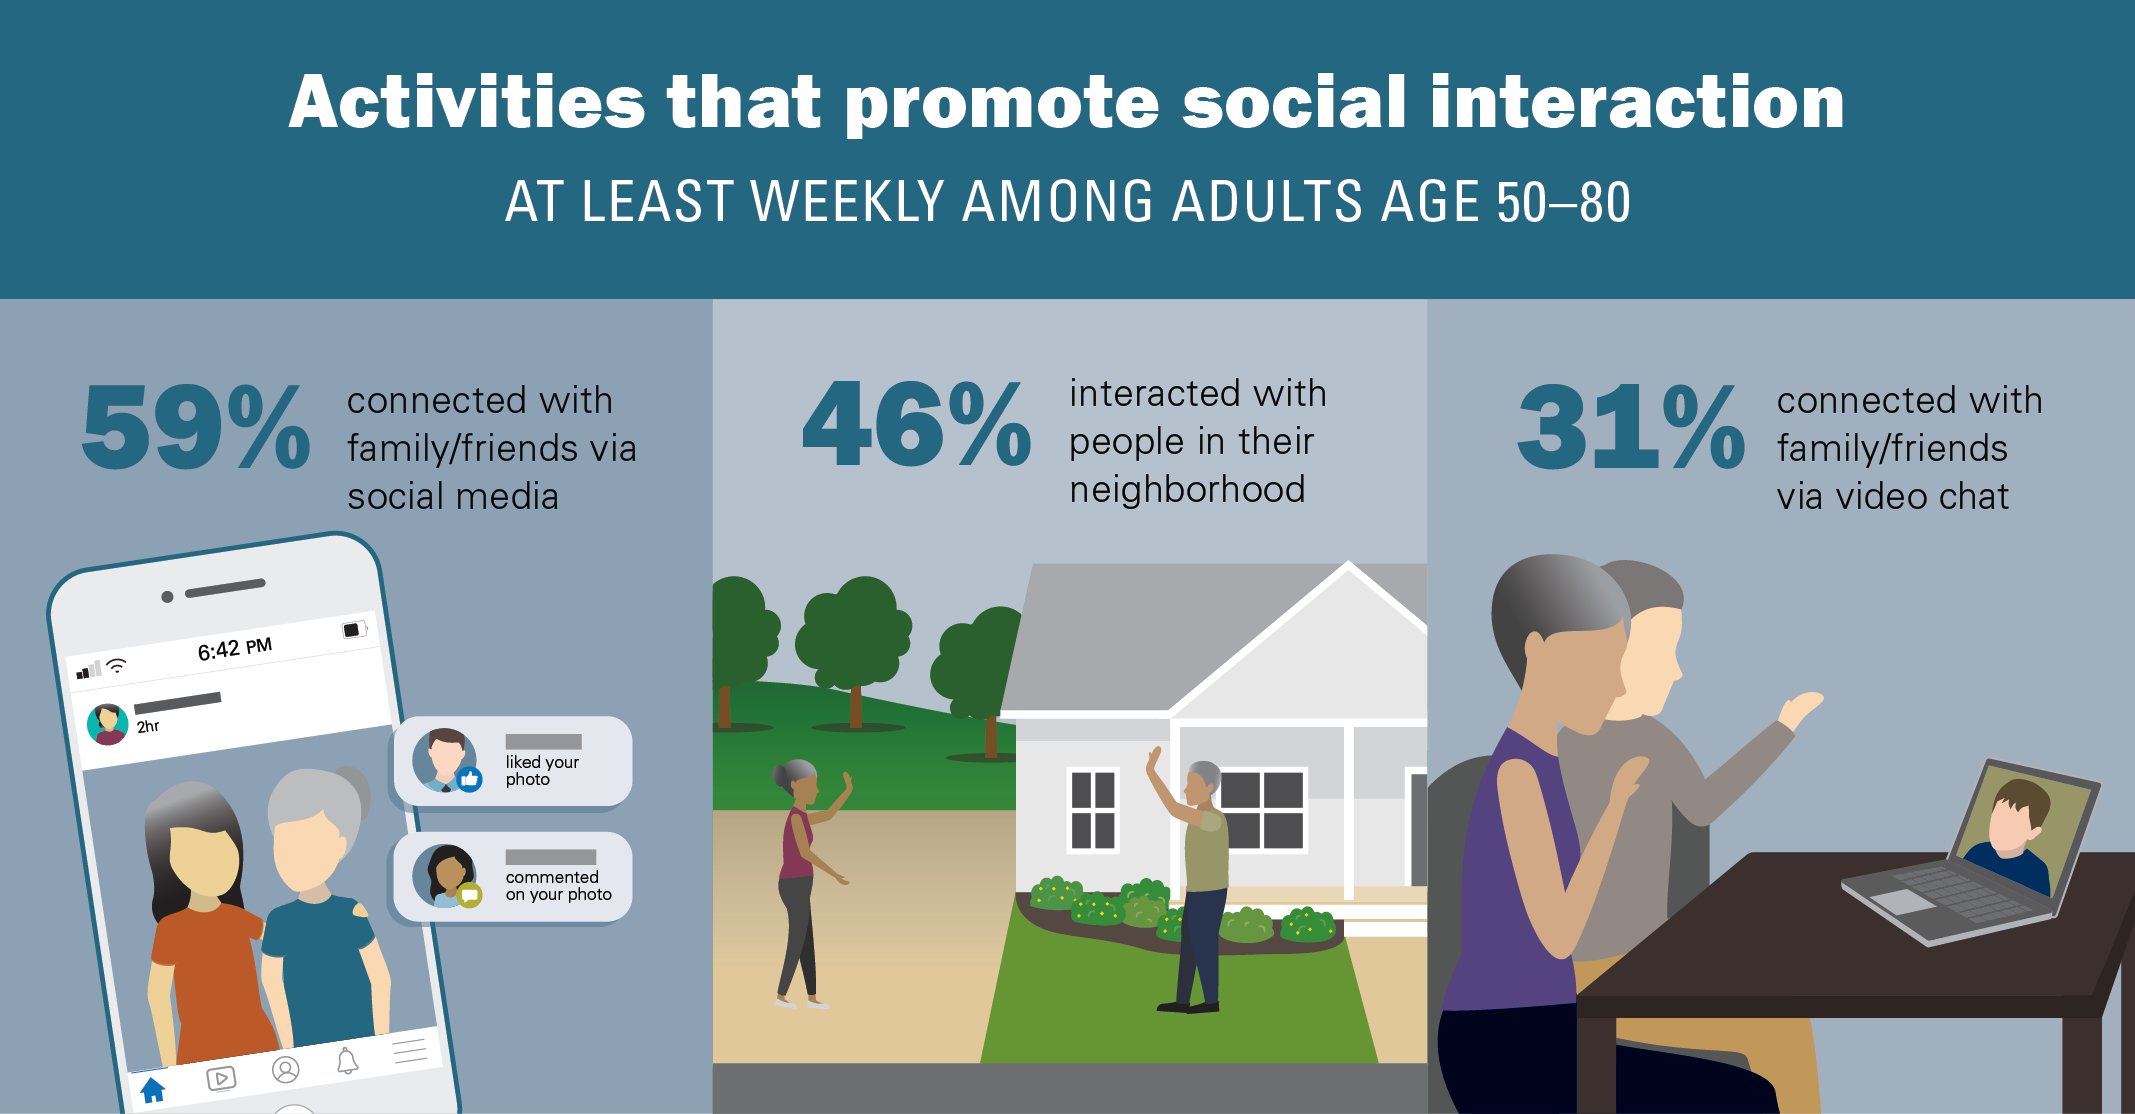 Activities that promote social interaction